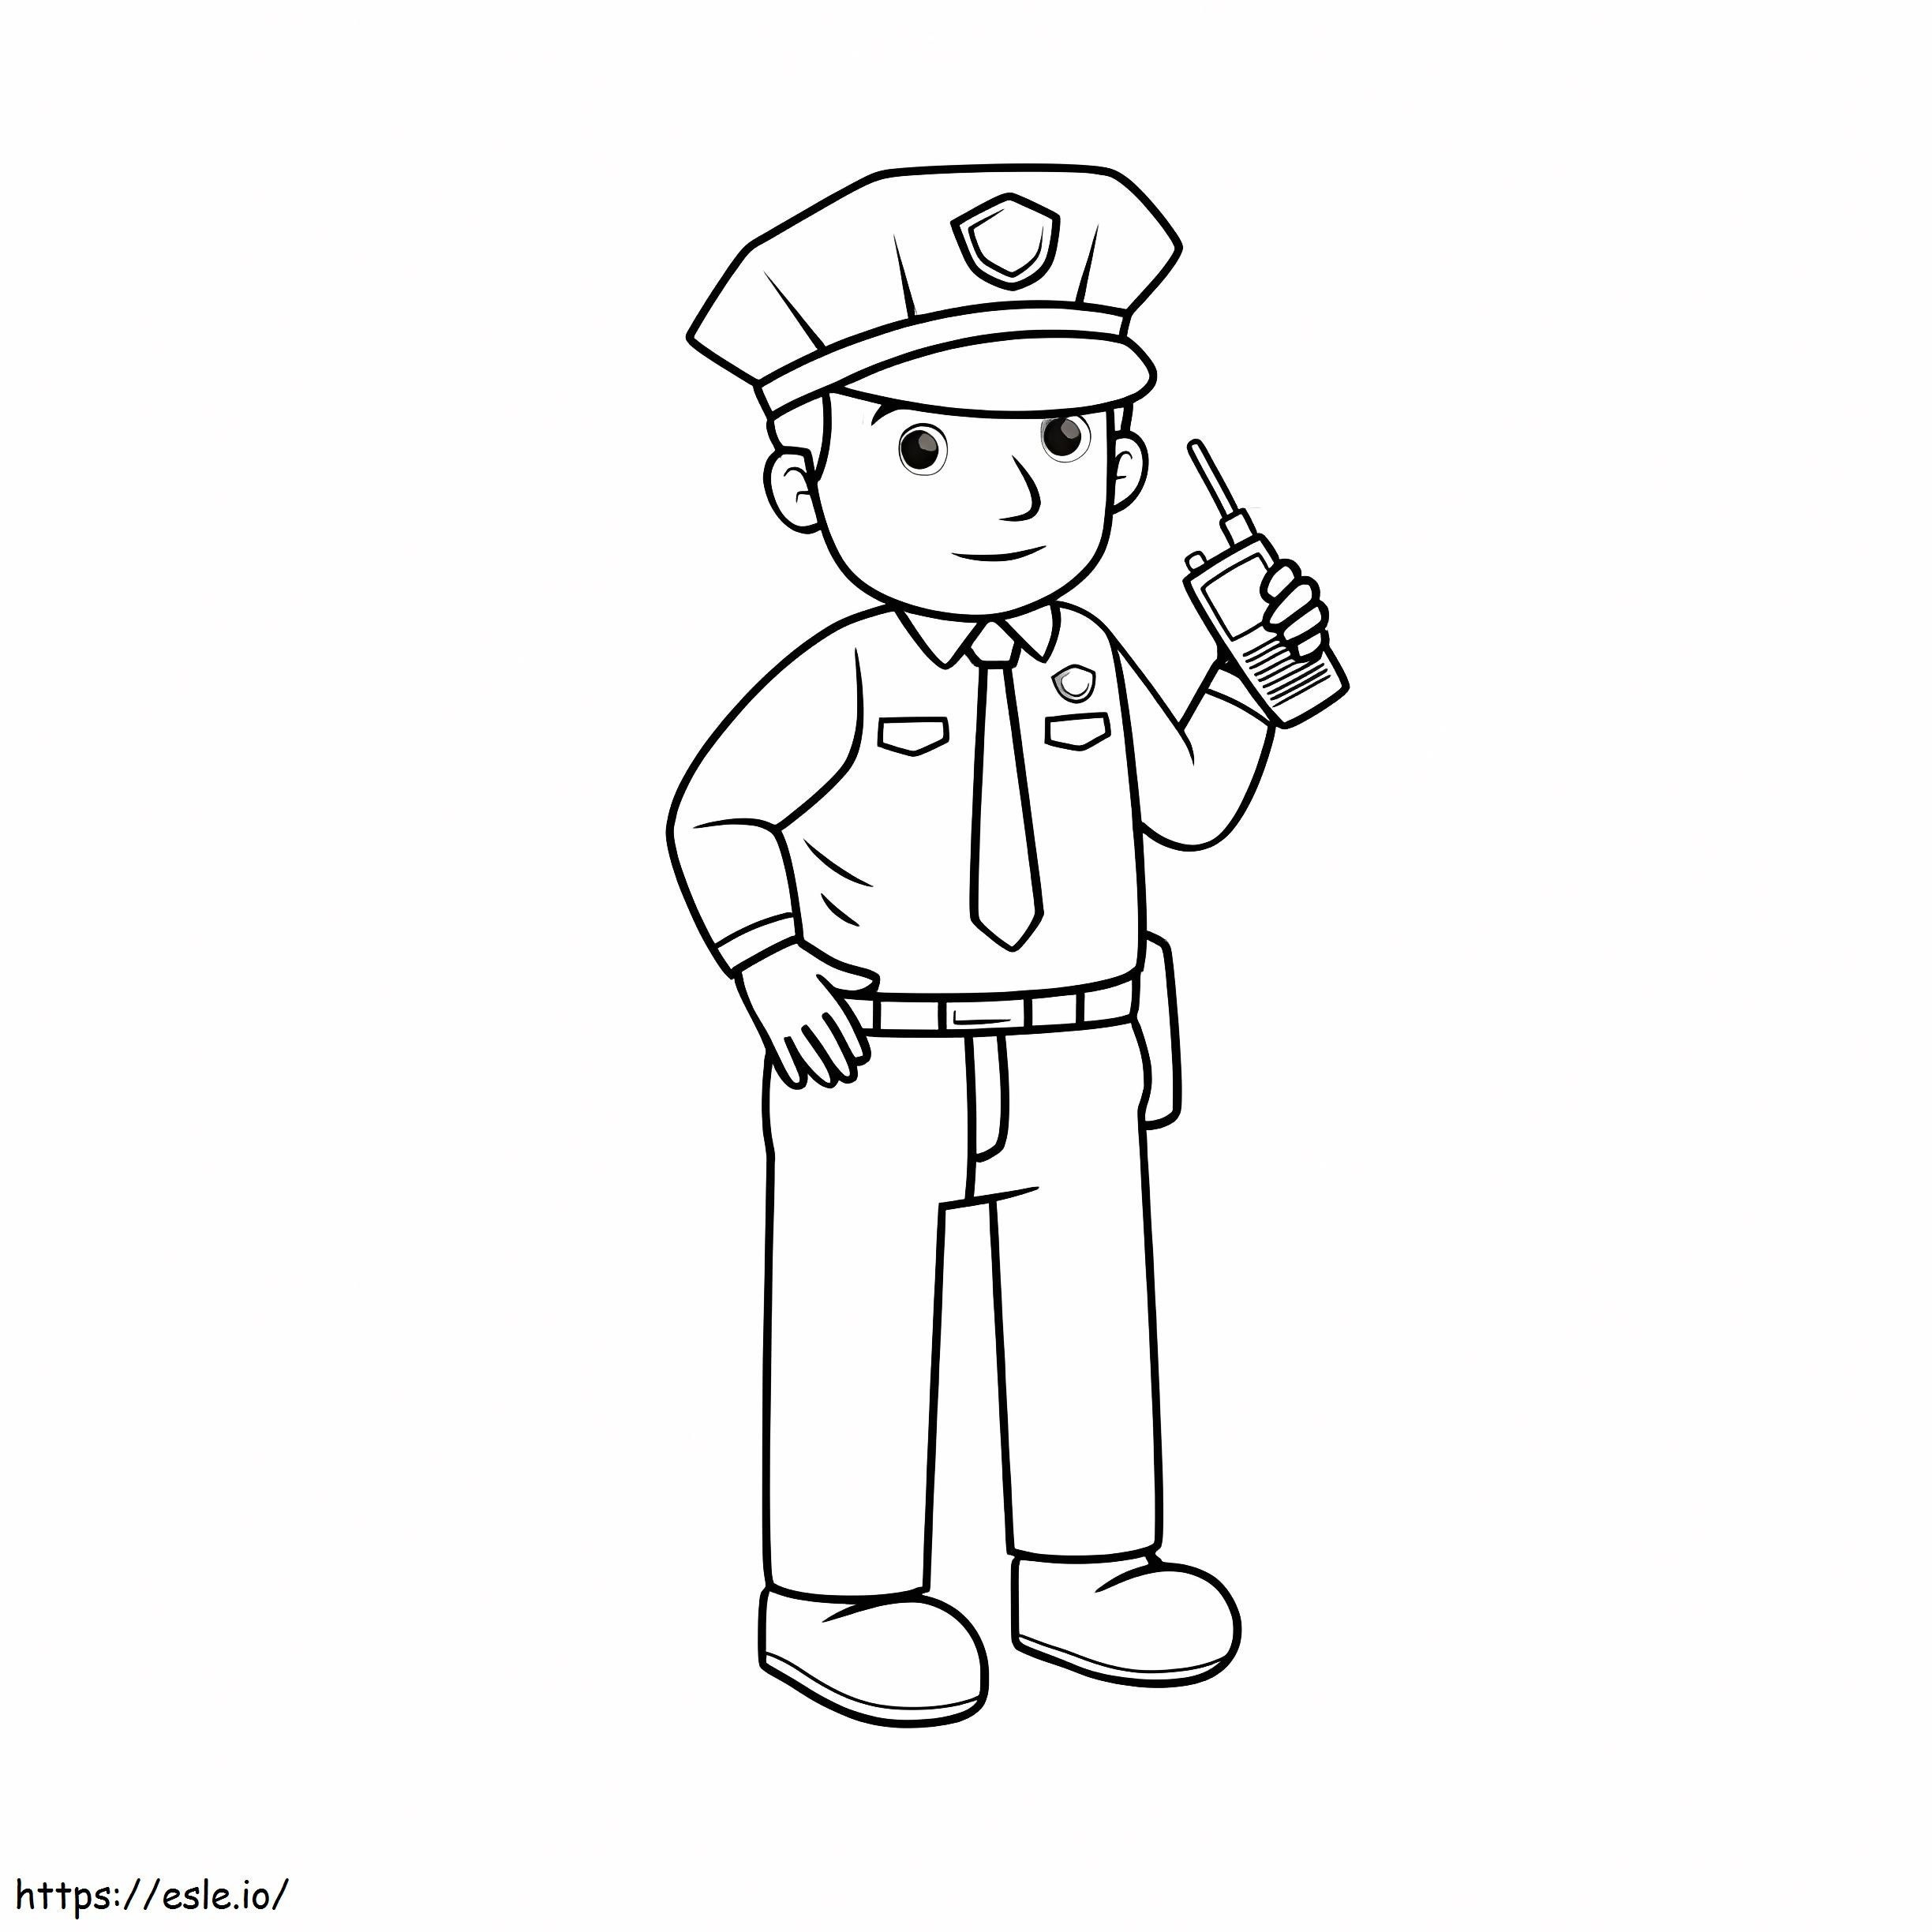 Police Holding Walkie Talkie coloring page